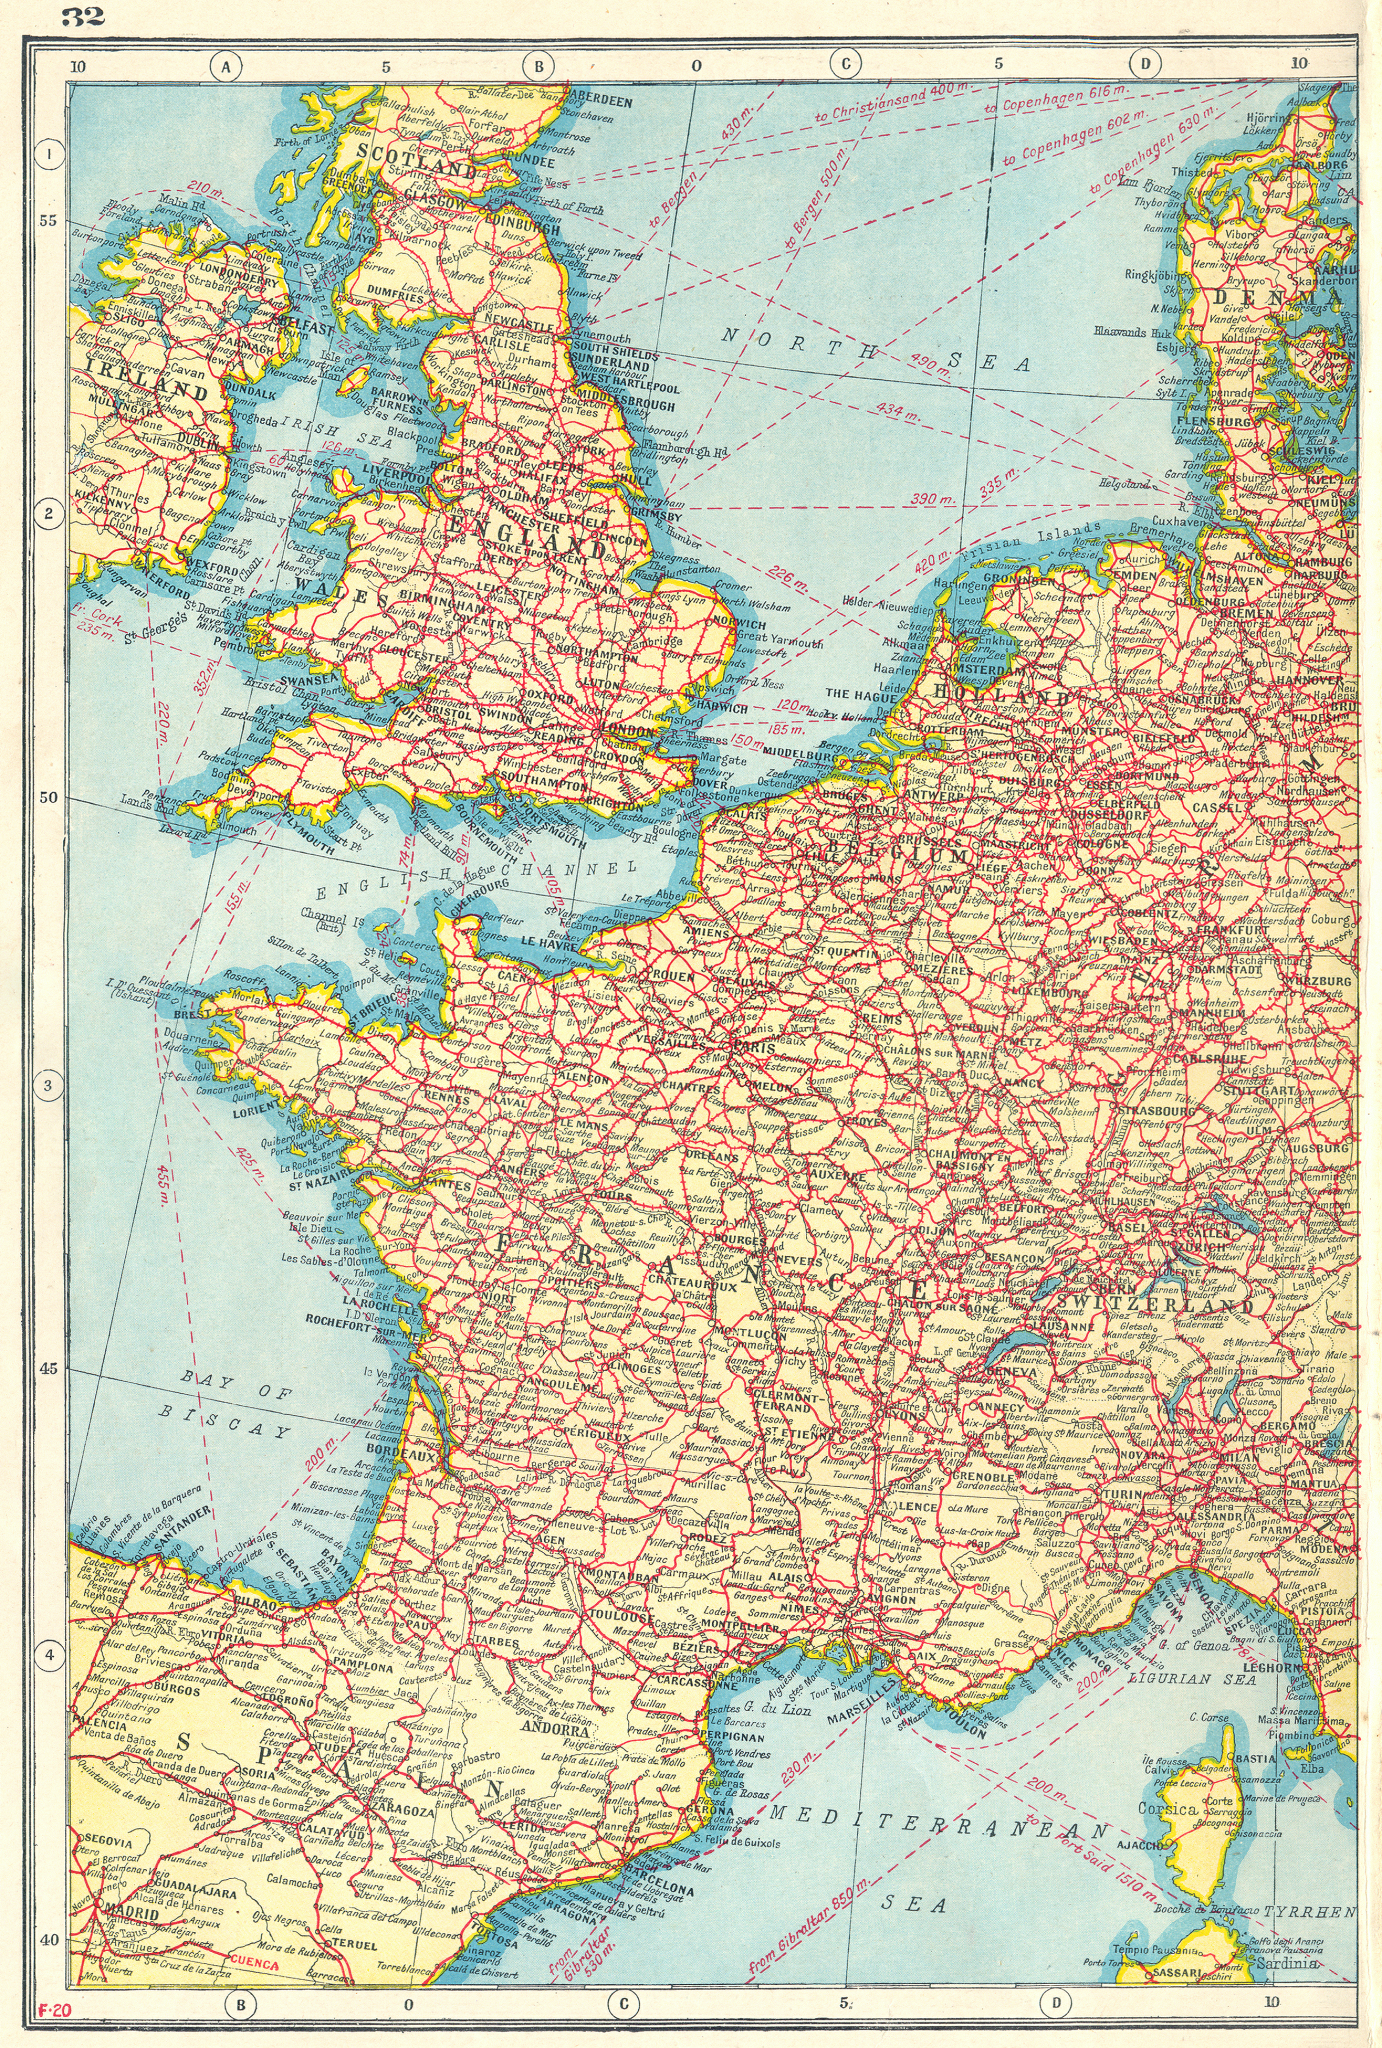 Associate Product WESTERN EUROPE. Showing Railways & steamship routes. West sheet 1920 old map